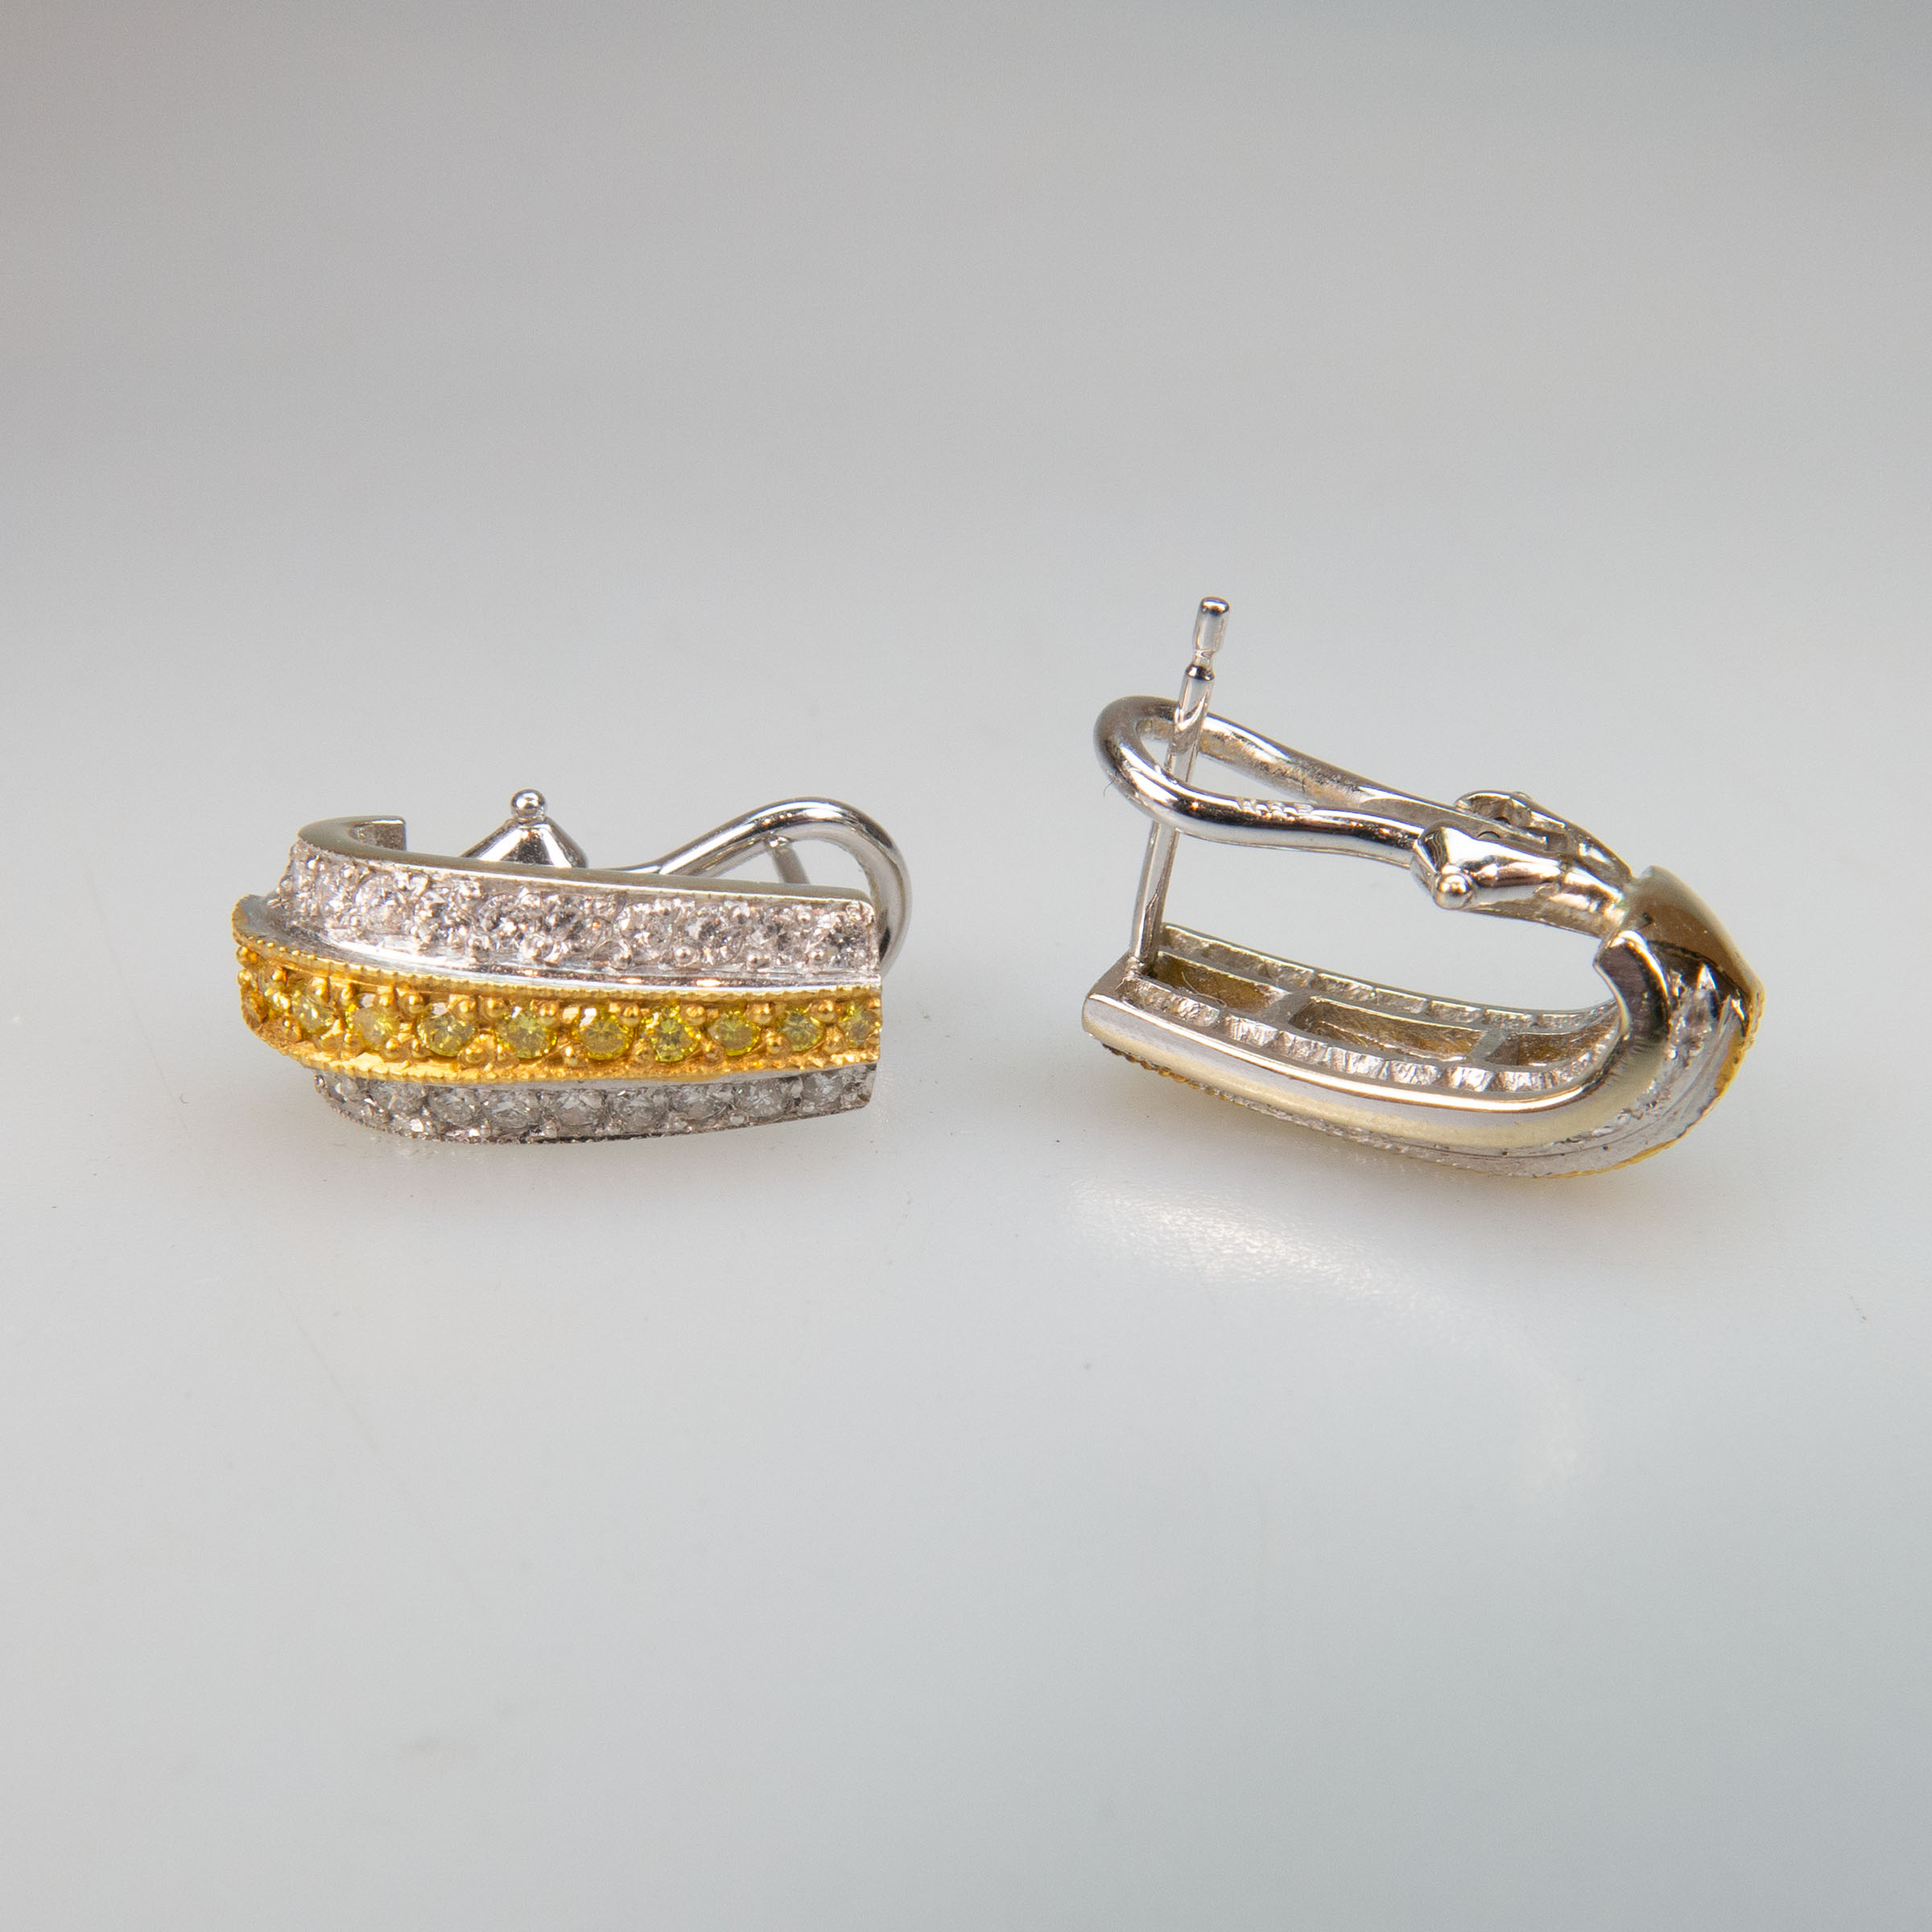 Pair Of 18k White And Yellow Gold Earrings